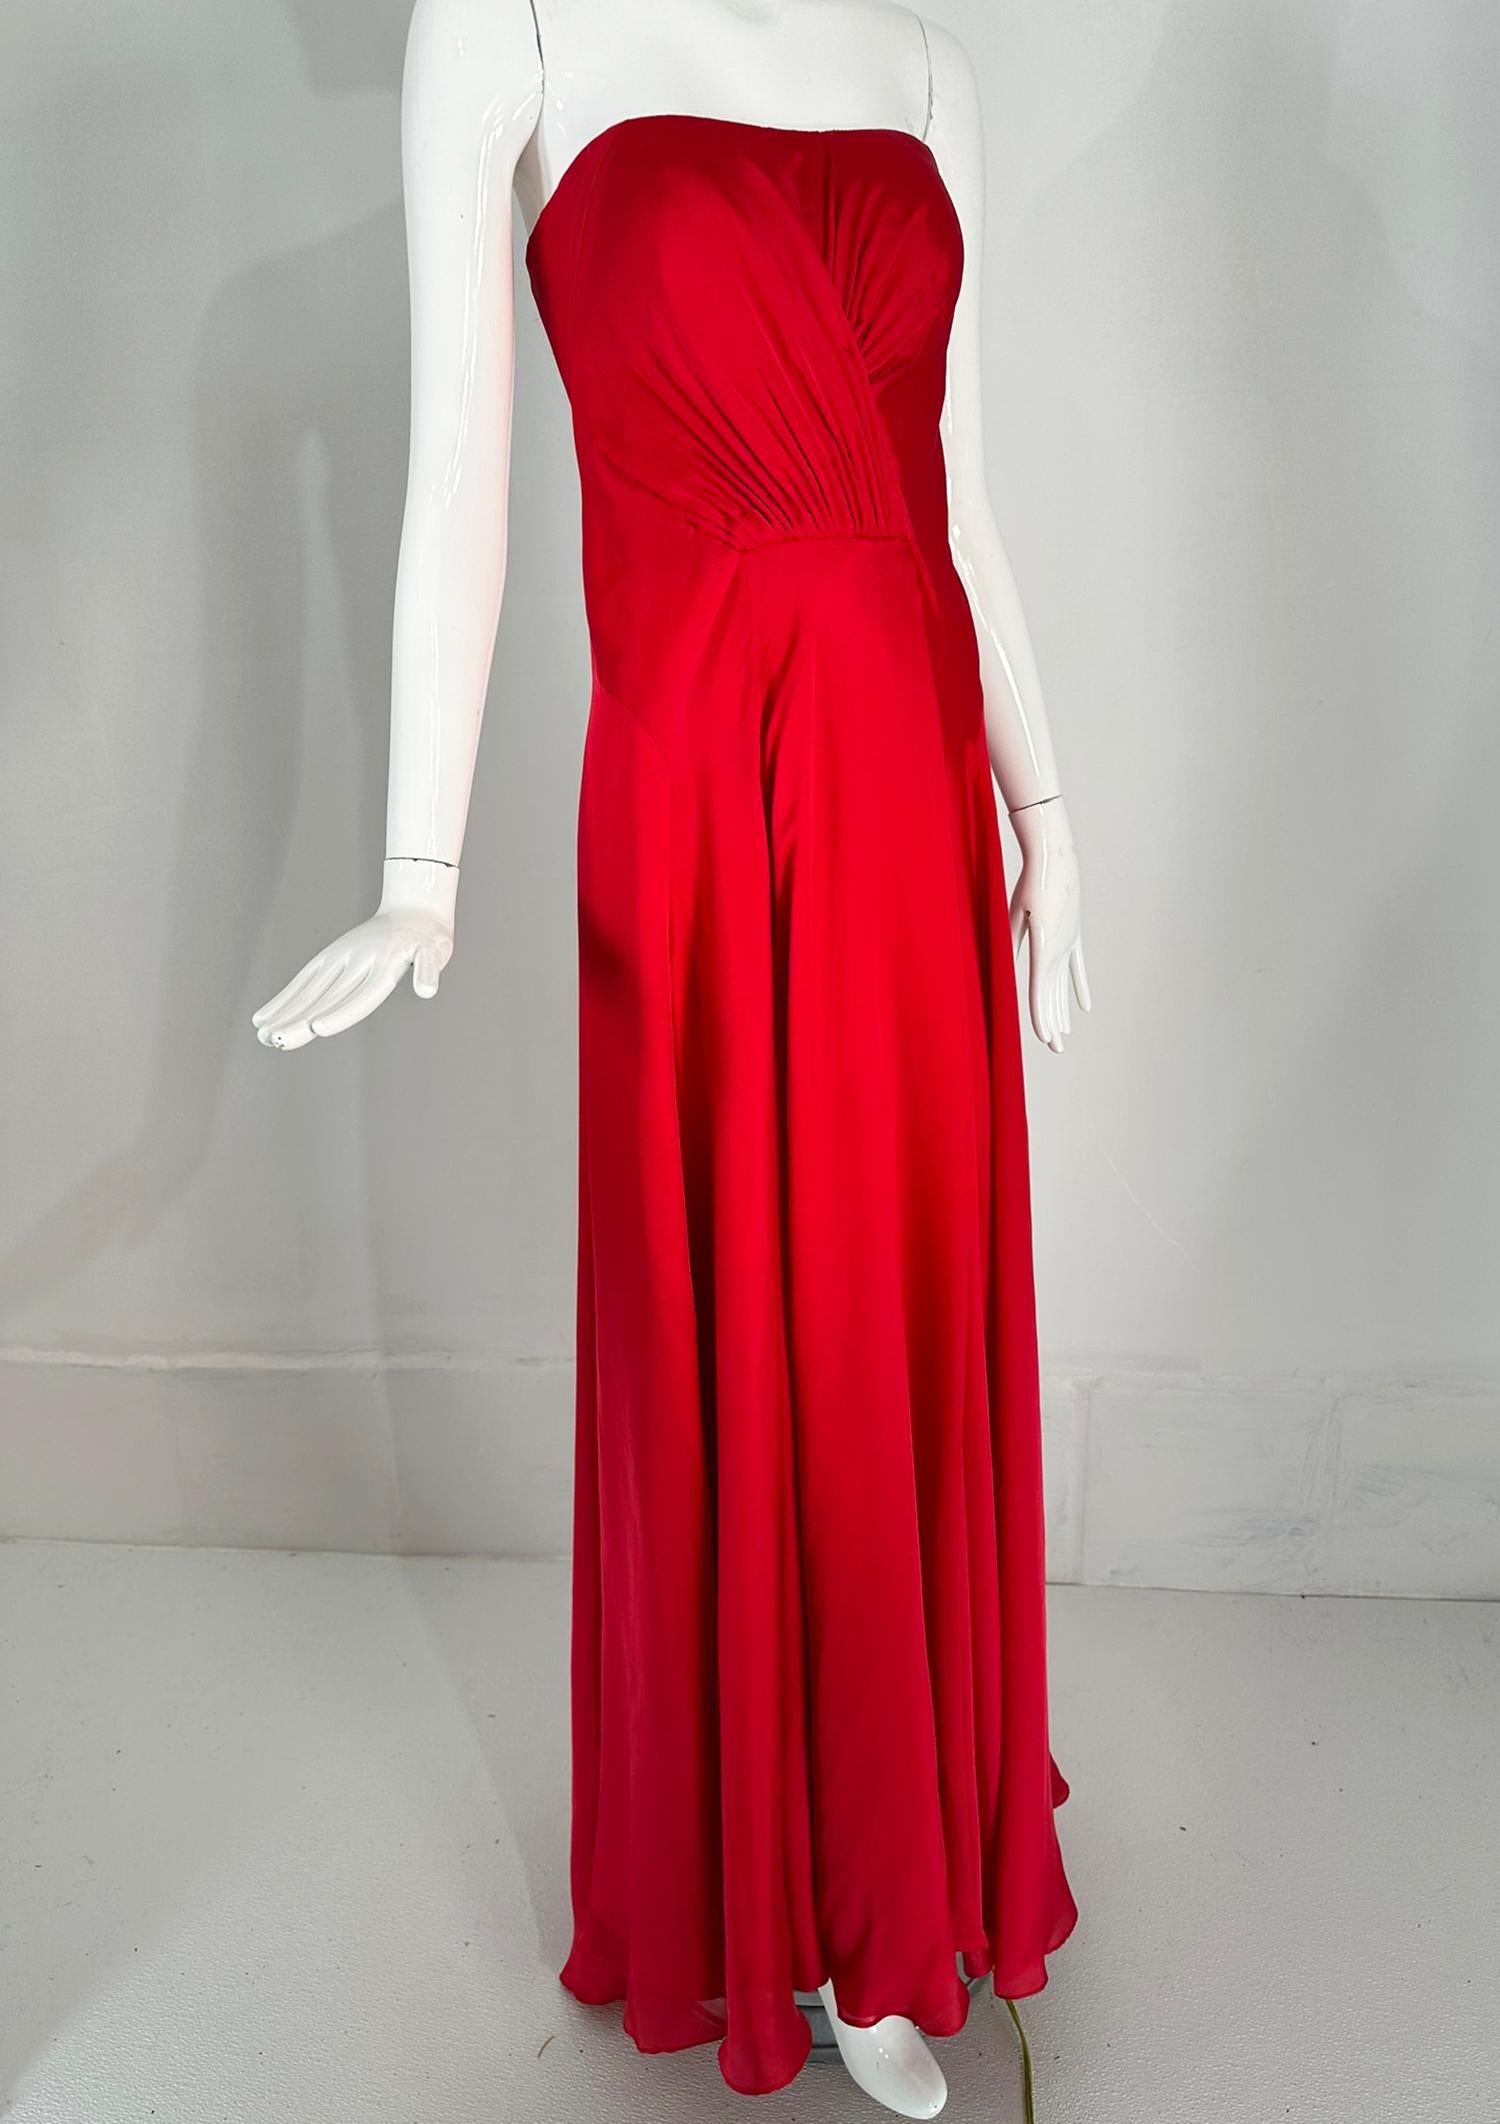 Ralph Lauren Collection Draped Red Silk Strapless Evening Gown 6 For Sale 7